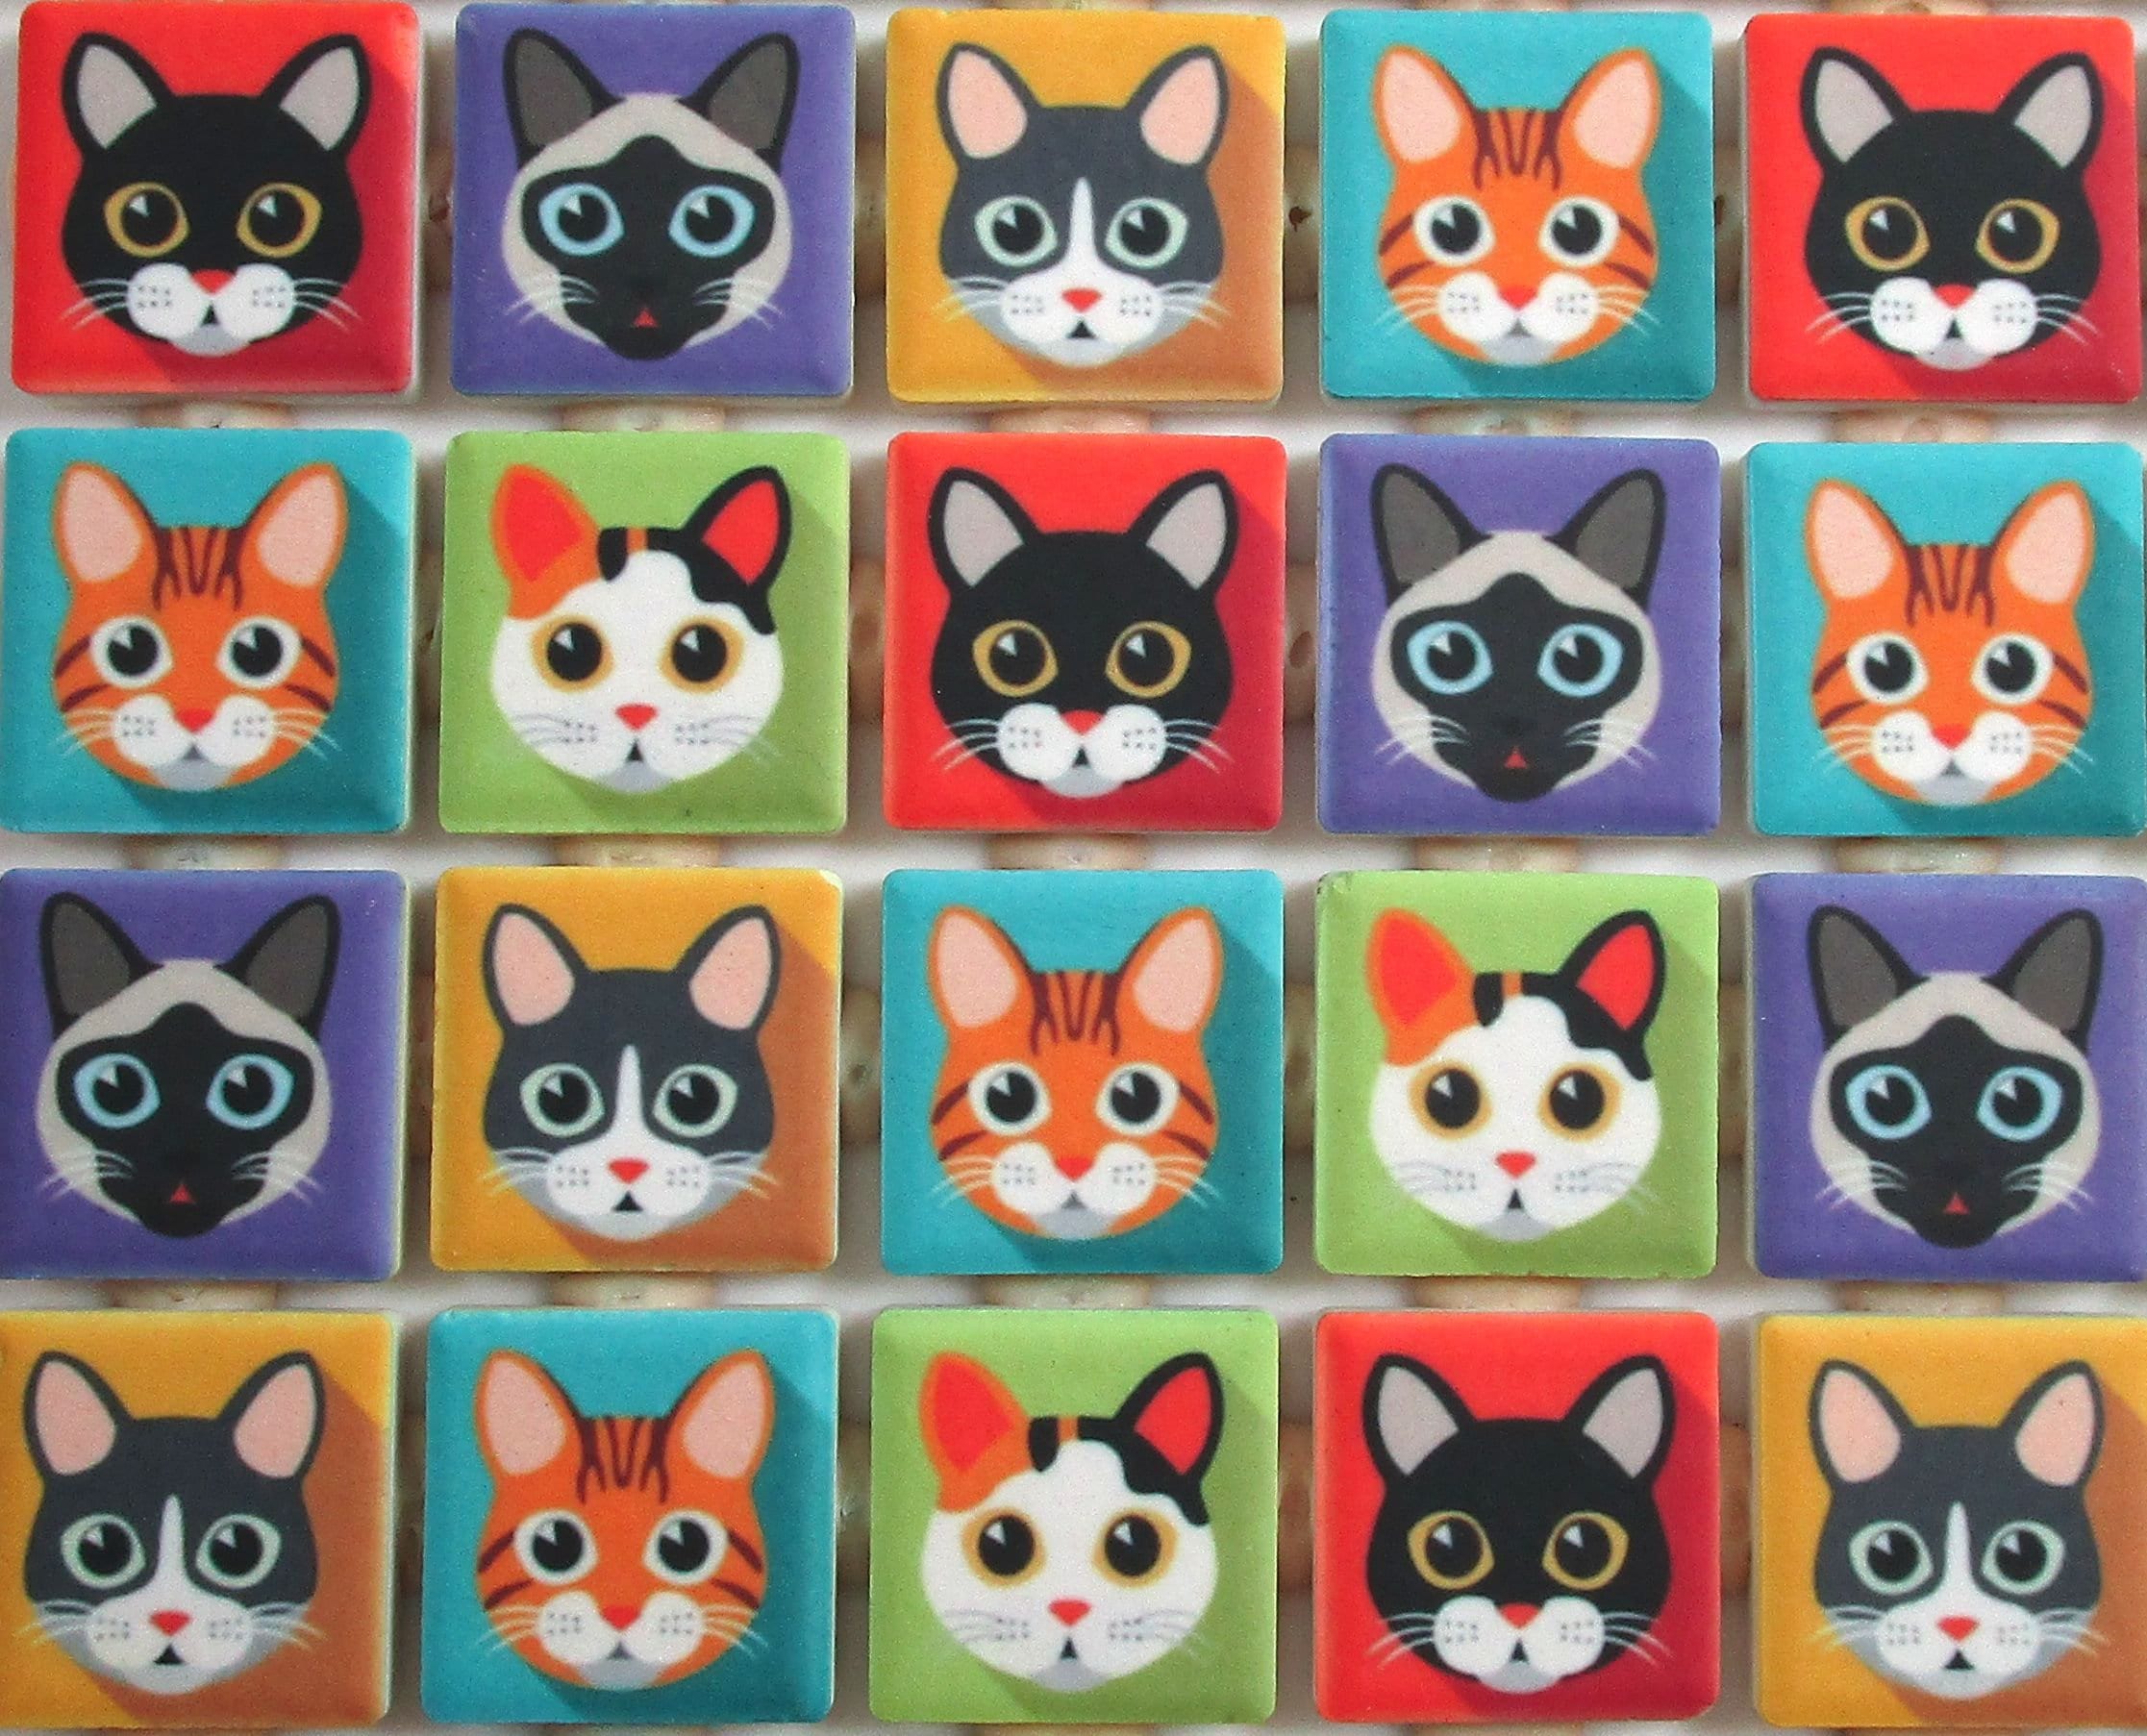 Cats of multi-floral print on decorative black ceramic tile wall hanging. 